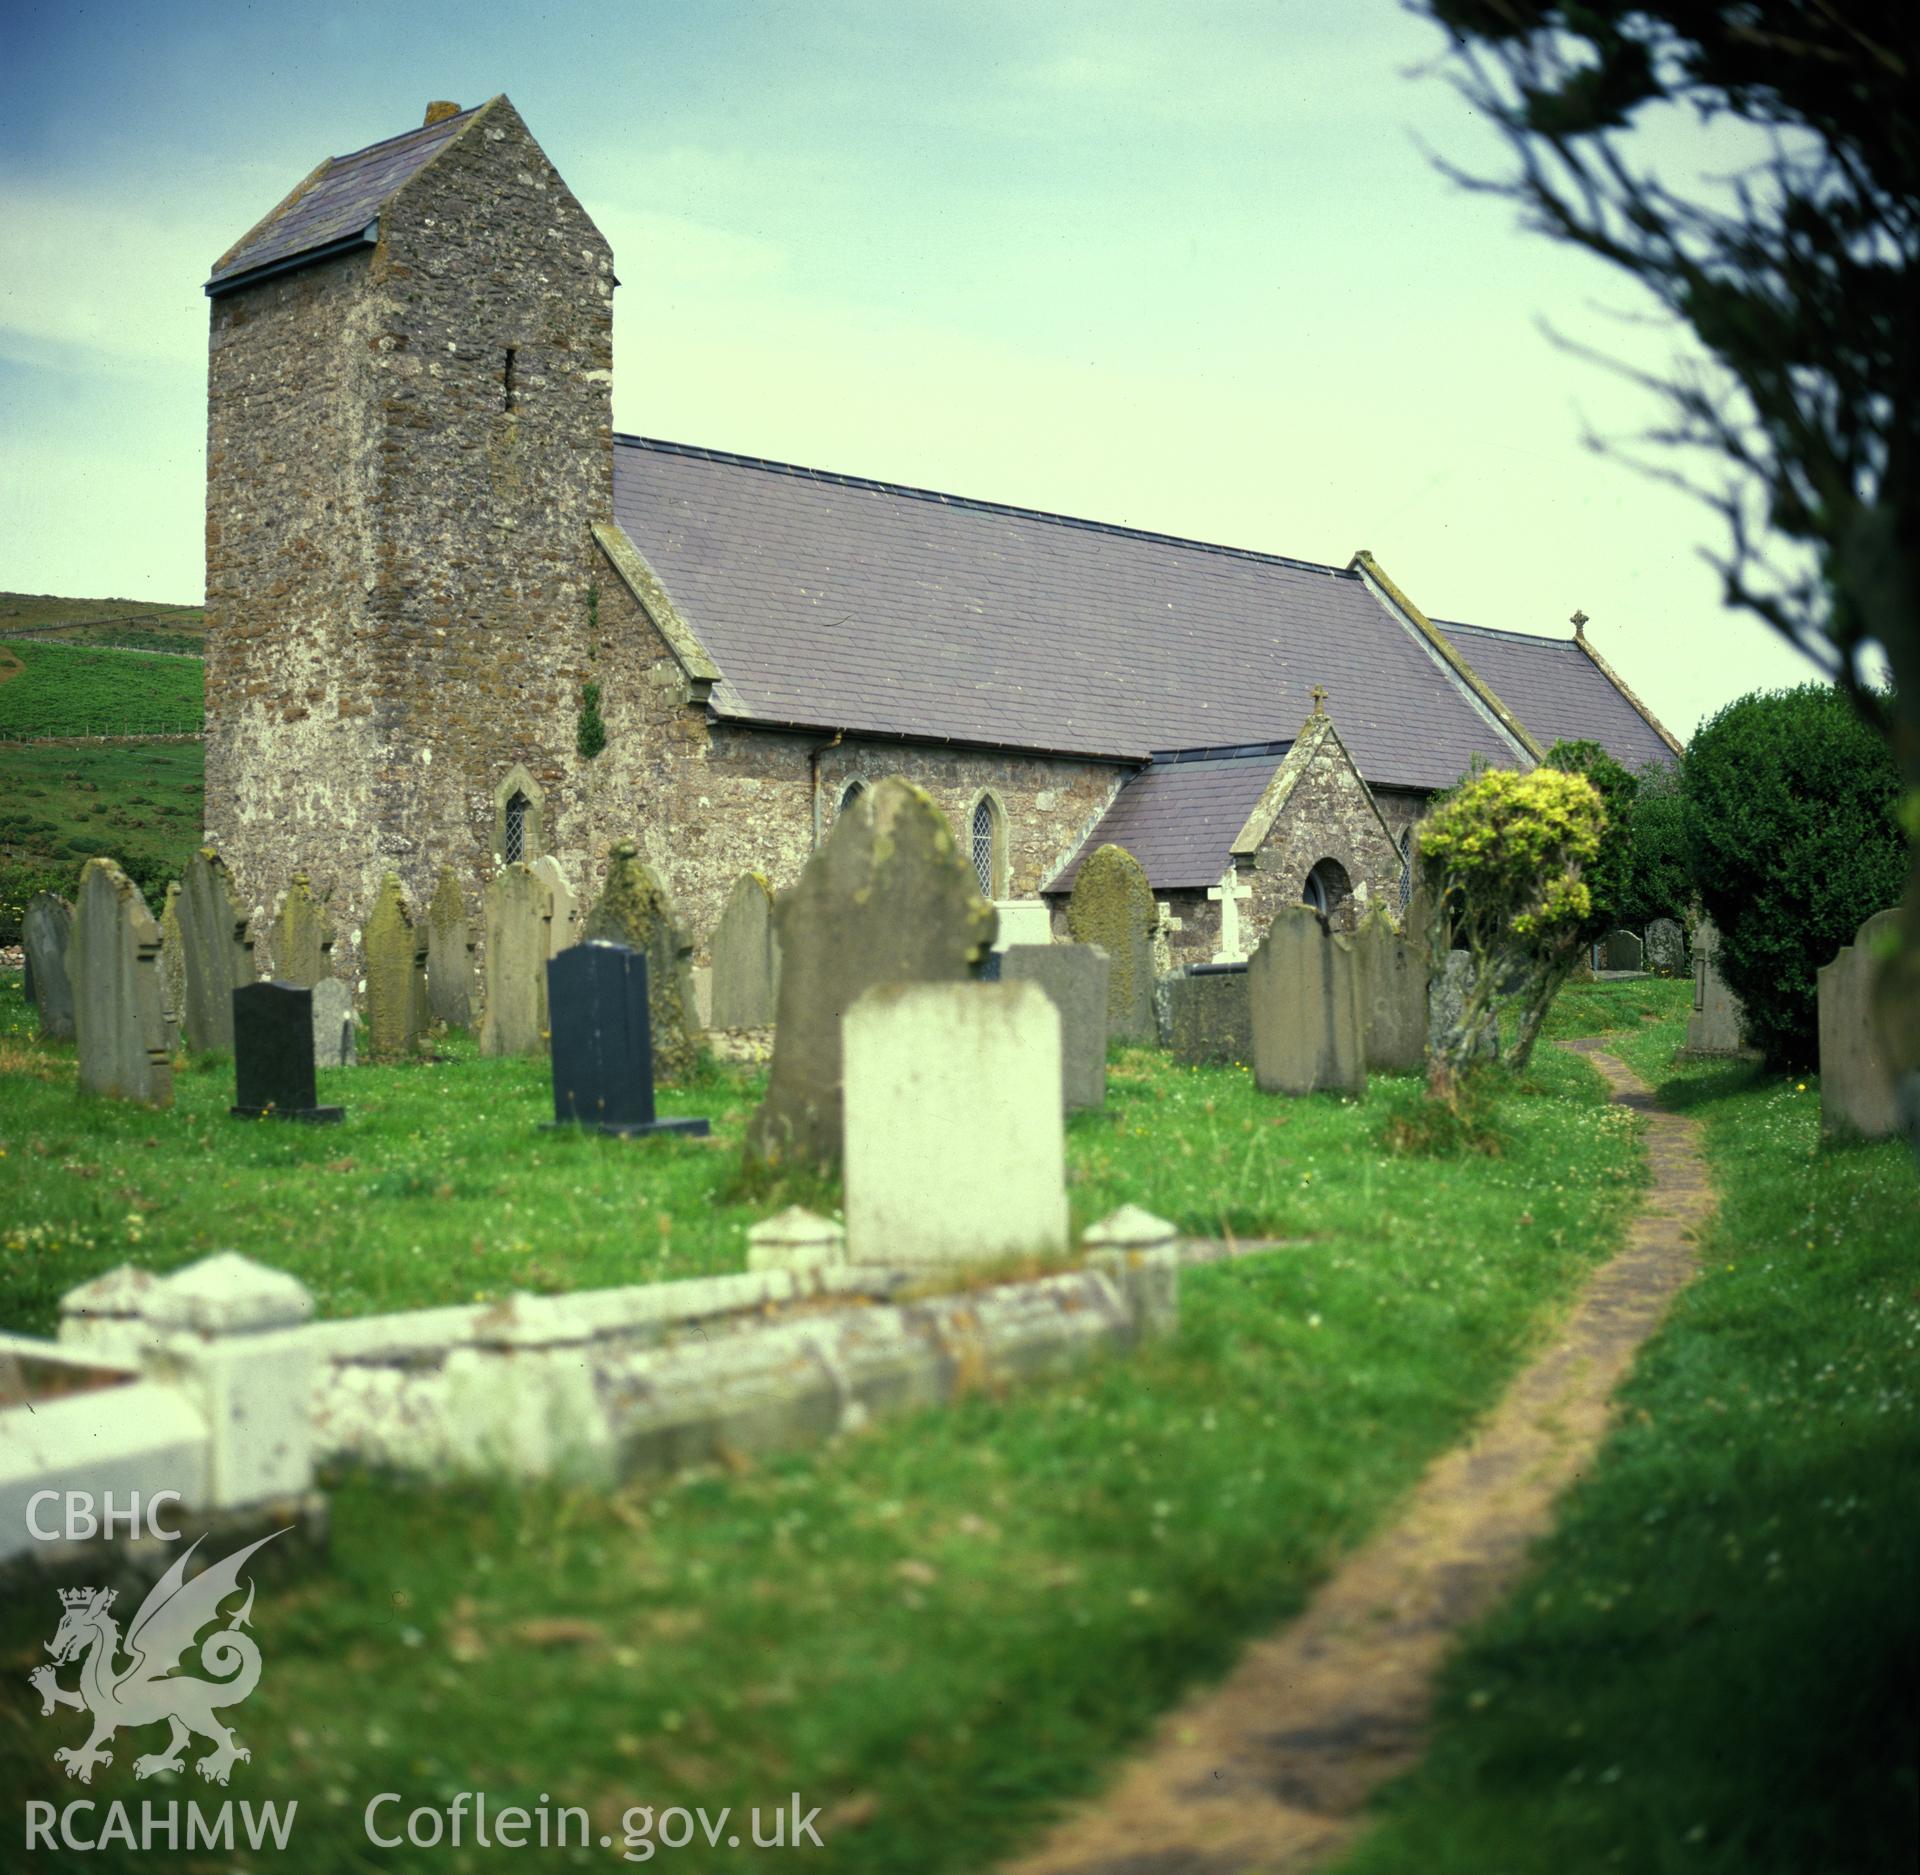 Digital copy of a colour negative showing a view of St Mary's Church, Rhossili.